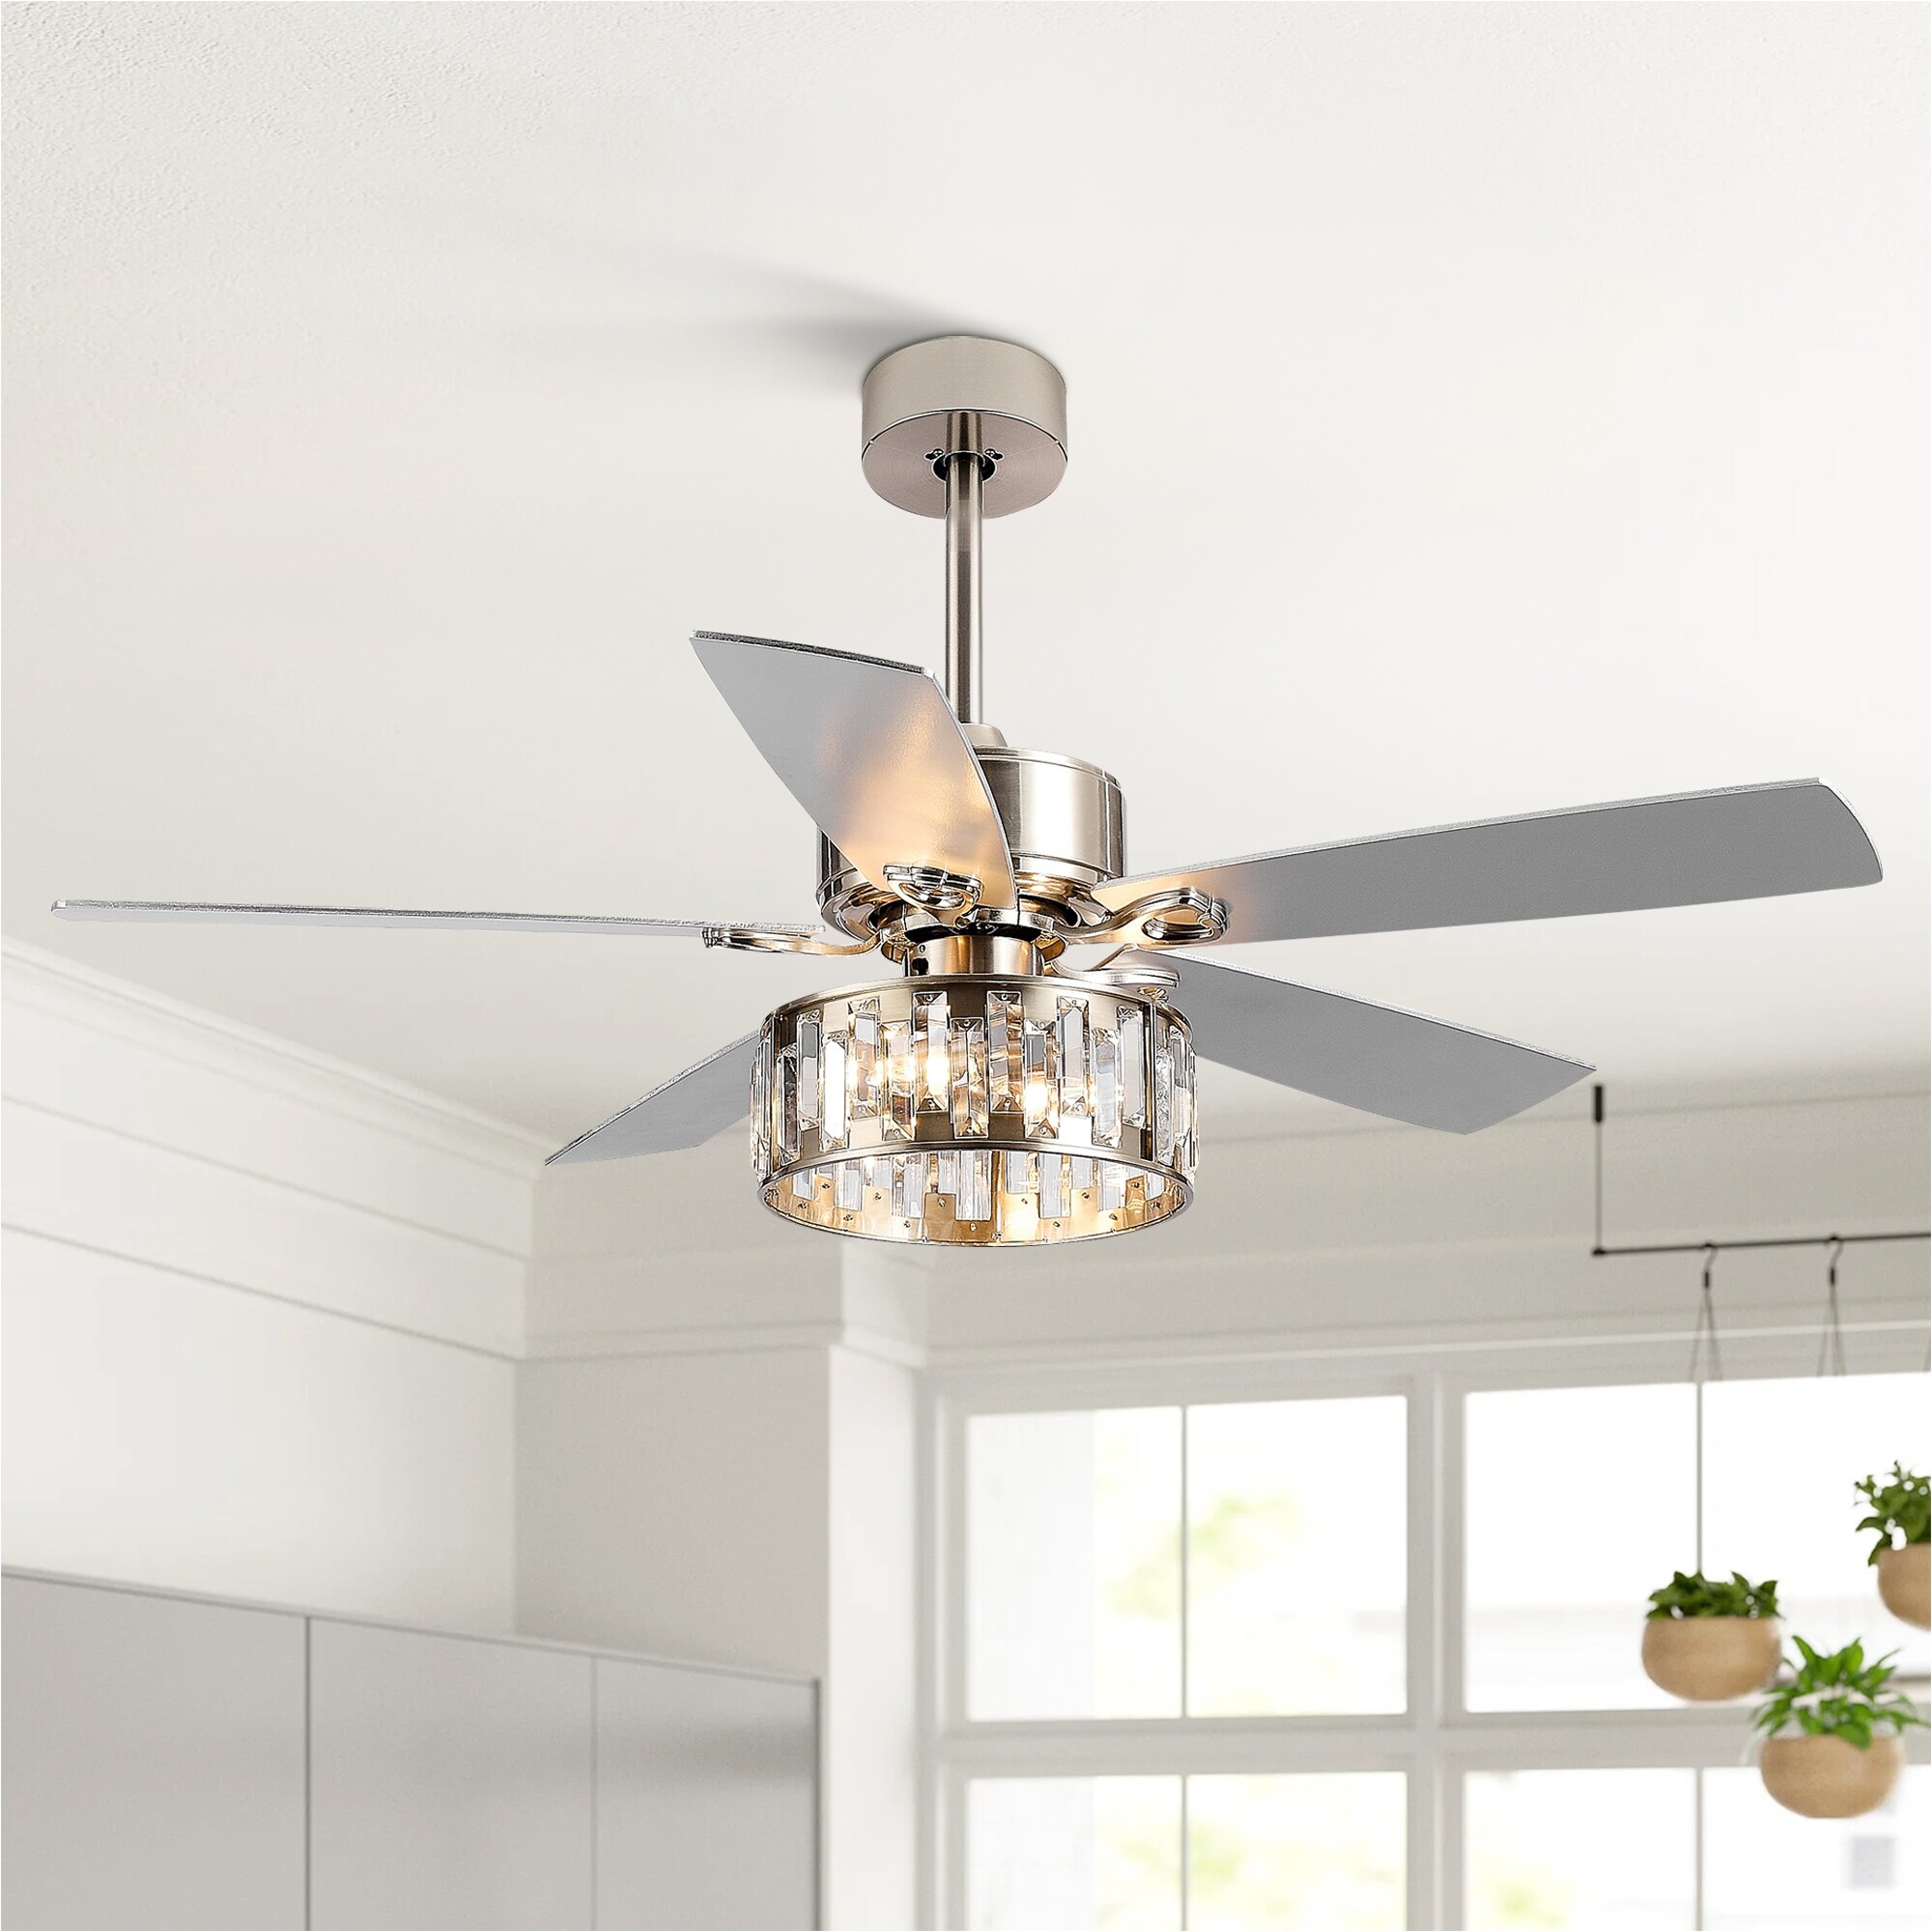 52 Inch Satin Nickel Ceiling Fan with Light Kit and Remote  Included(5-Blade) On Sale Bed Bath  Beyond 37456597